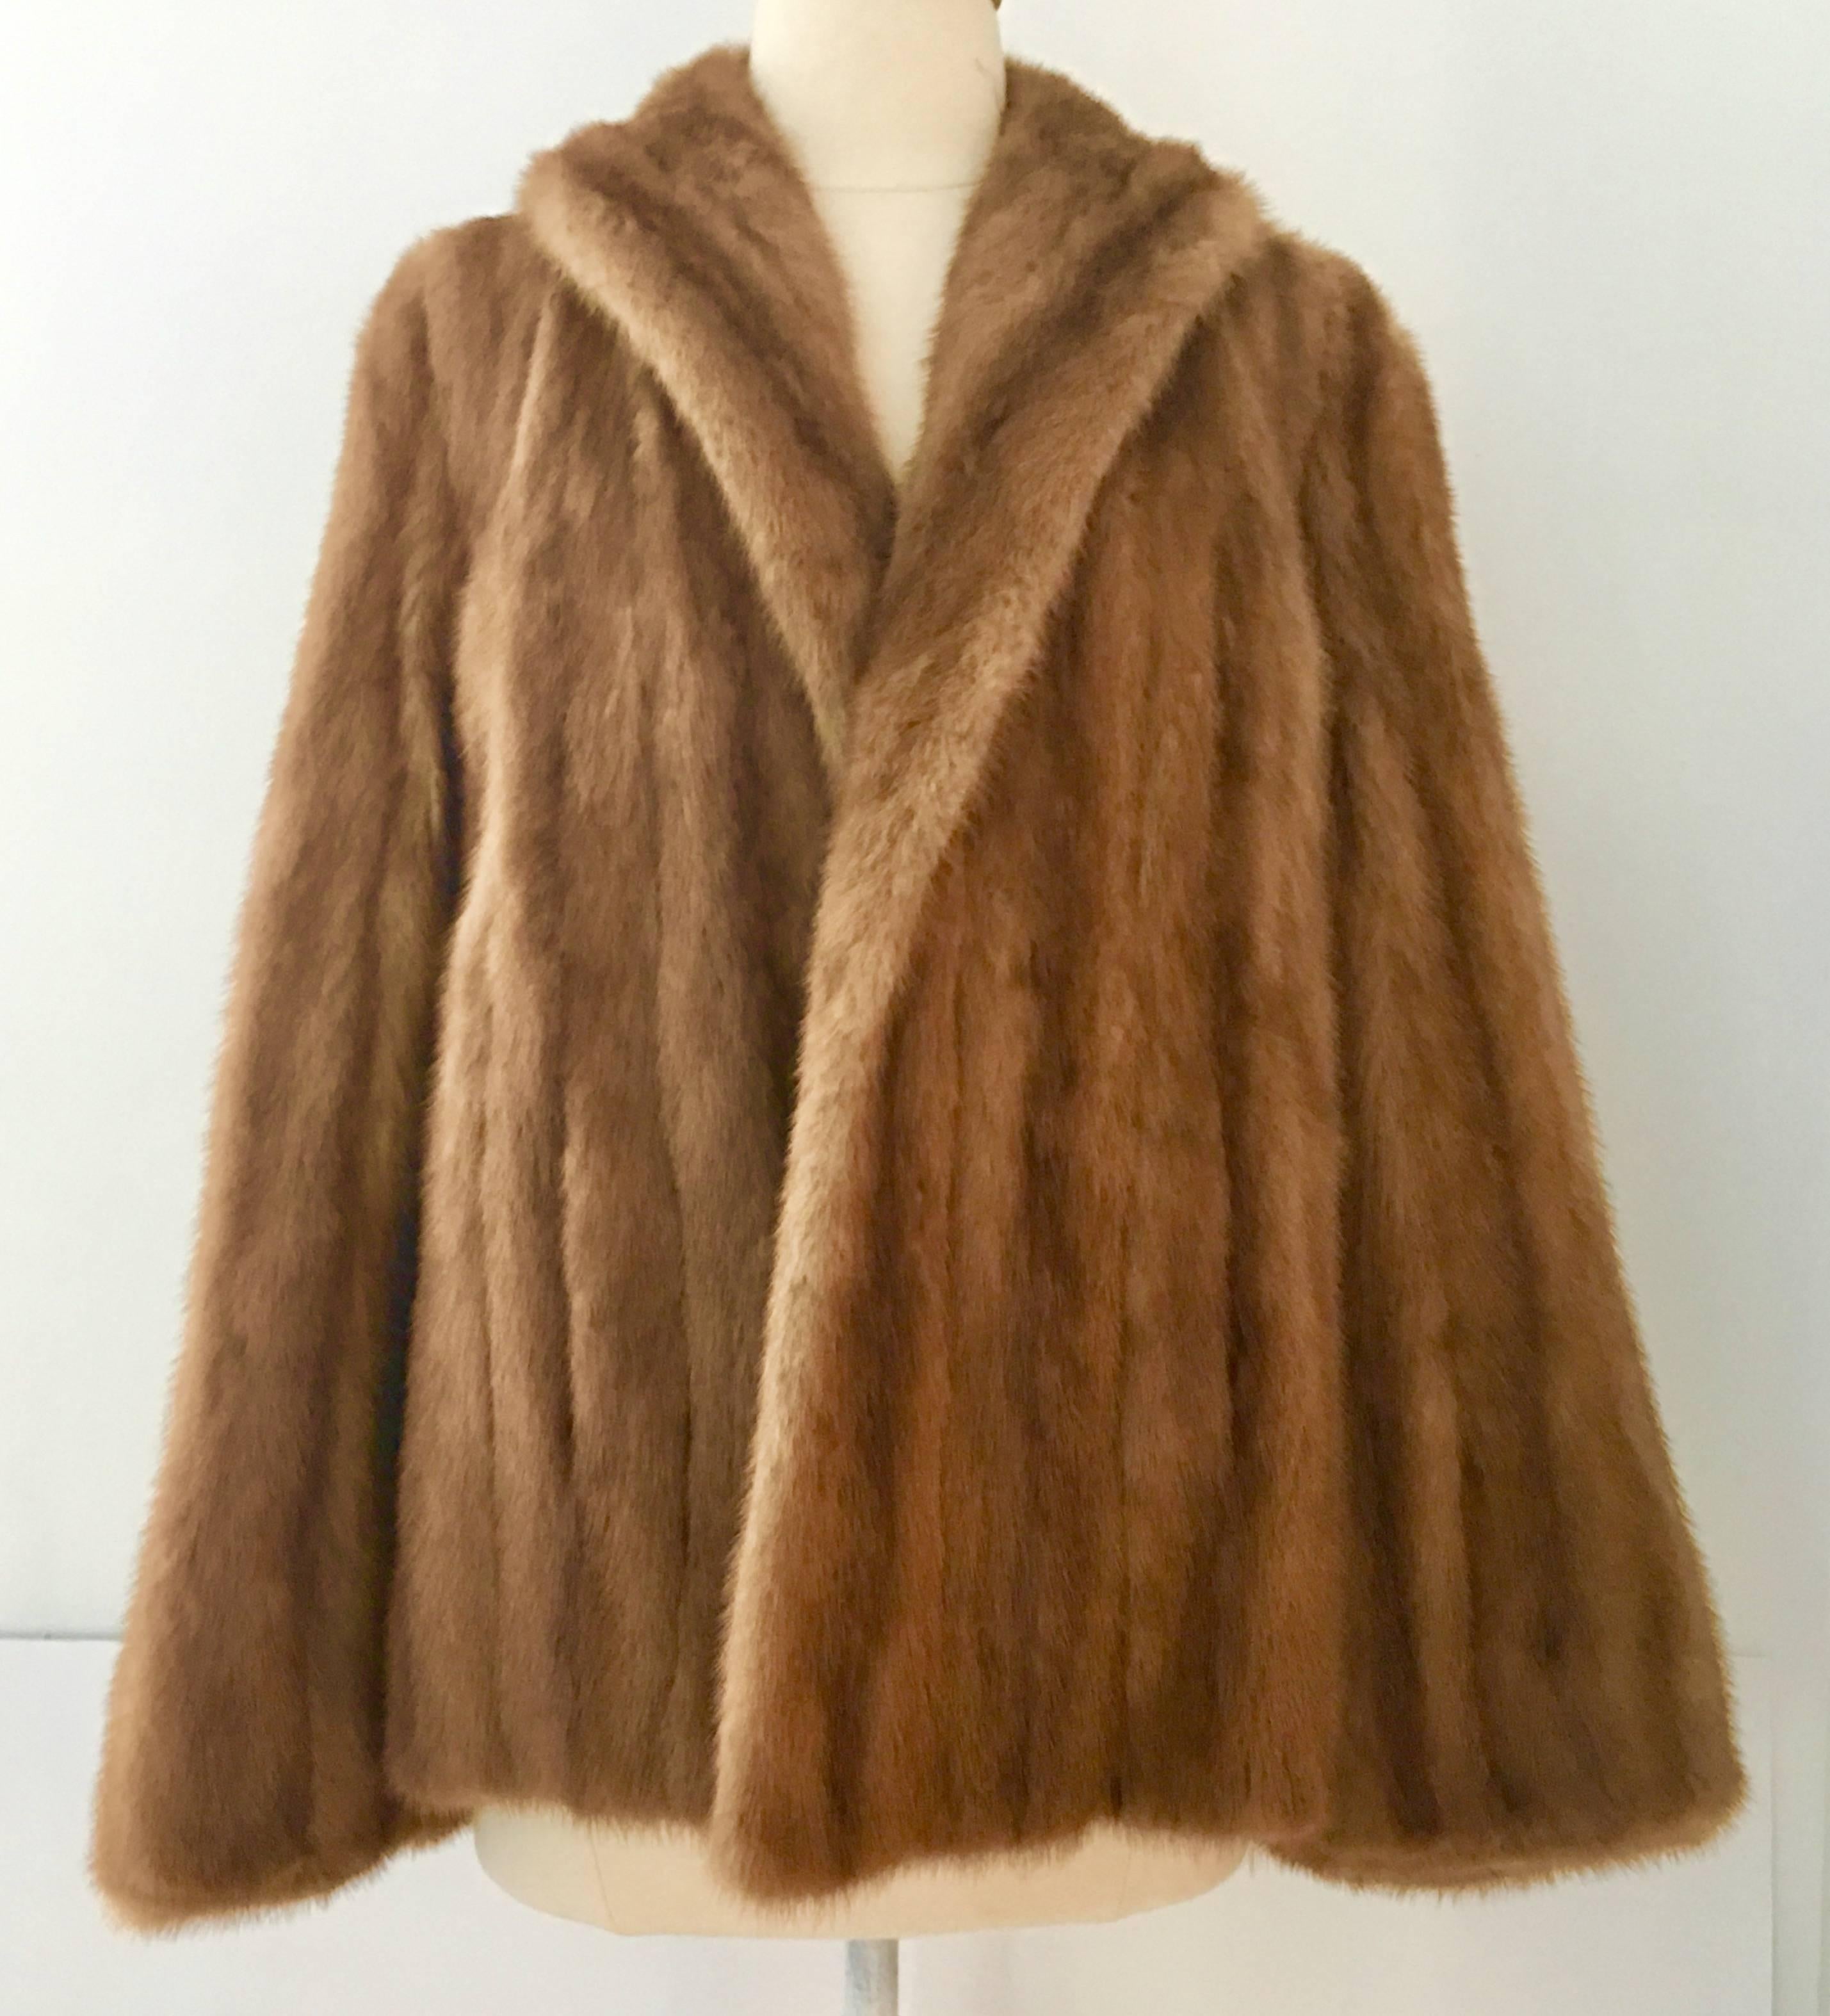 Gorgeous Mid-Century whiskey dyed mink fur swing jacket with wide bell sleeves. Fully lined coat with two front side pockets. Fits like a women's medium, chest is 20" from armpit to armpit, sleeves are 24.5" shoulder to end of sleeve